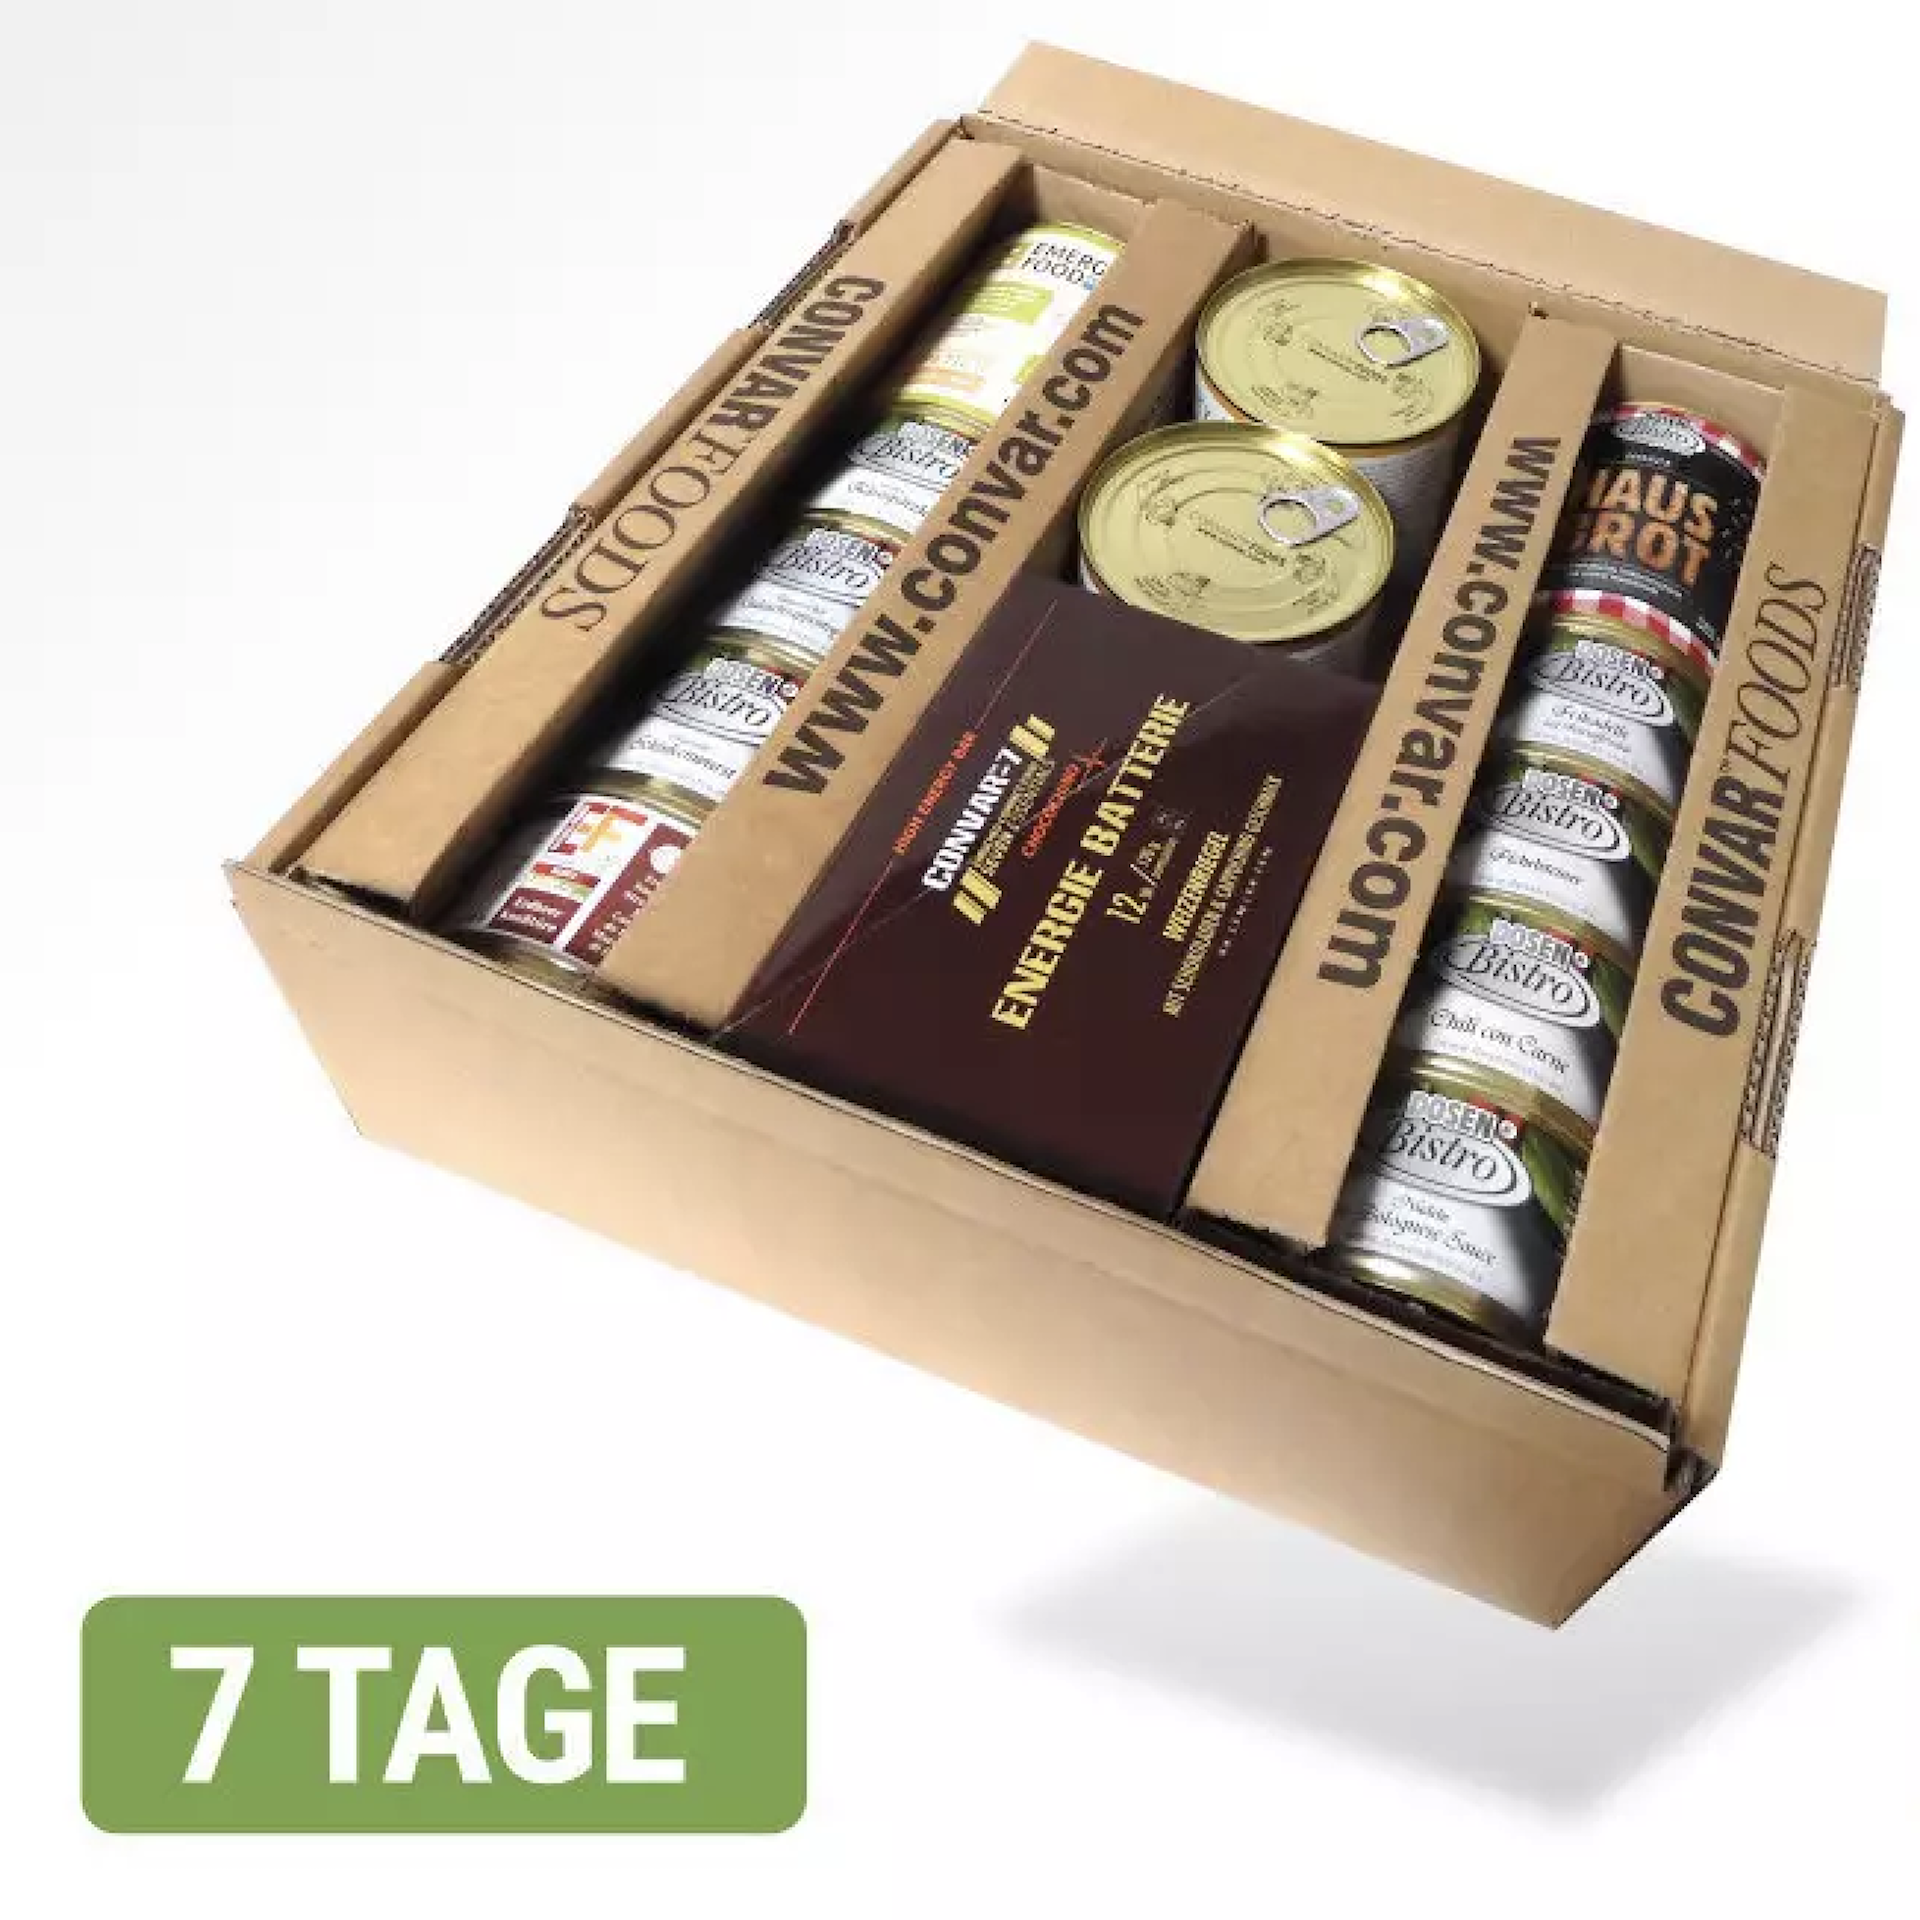 CONVAR FOODS - 7 Tage All-in-One Variante 1